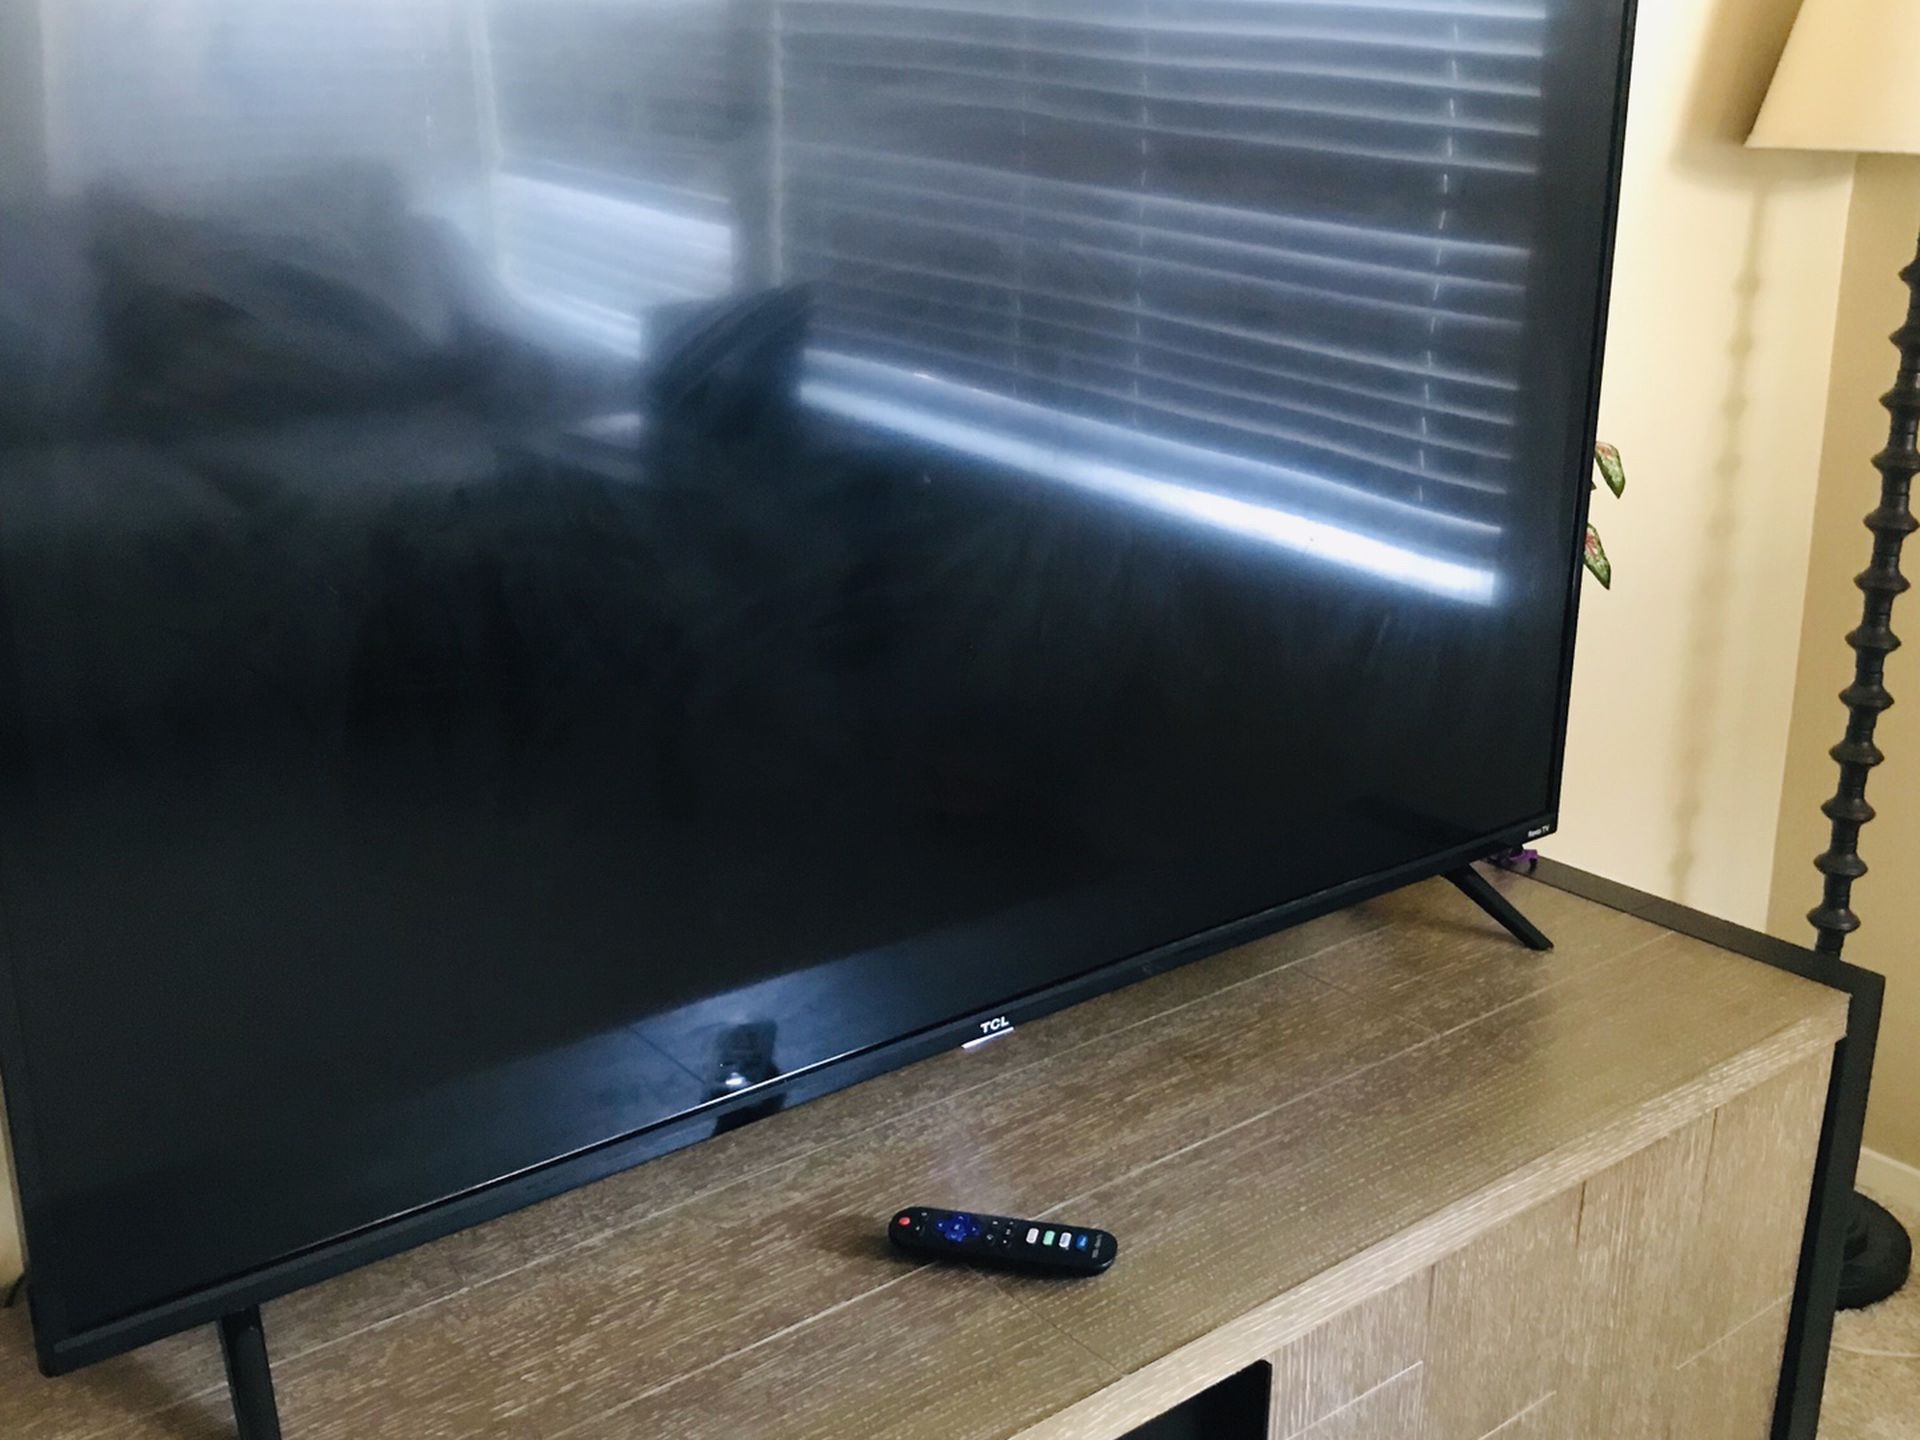 TCL 55S425 55 inch 4K Smart LED Roku TV (2019) With Crack On The Screen